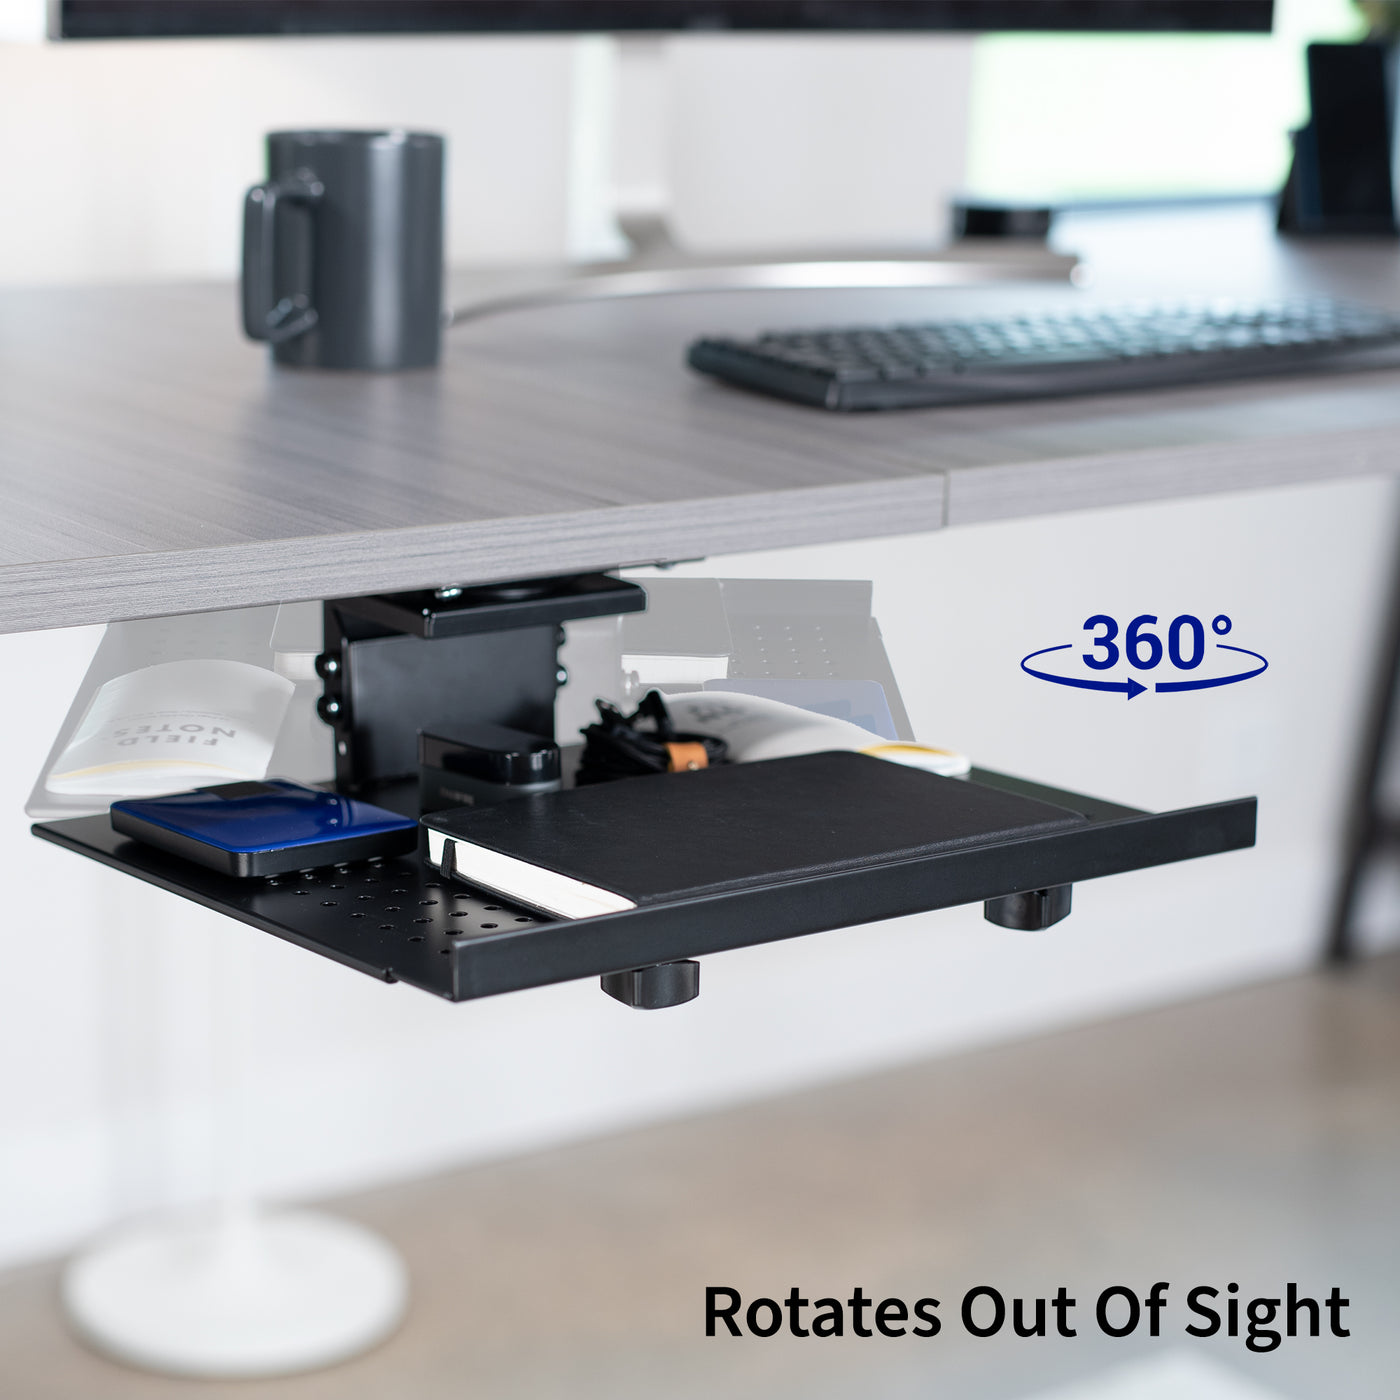 Under desk adjustable laptop tray lets you have comfortable typing angles as you work.